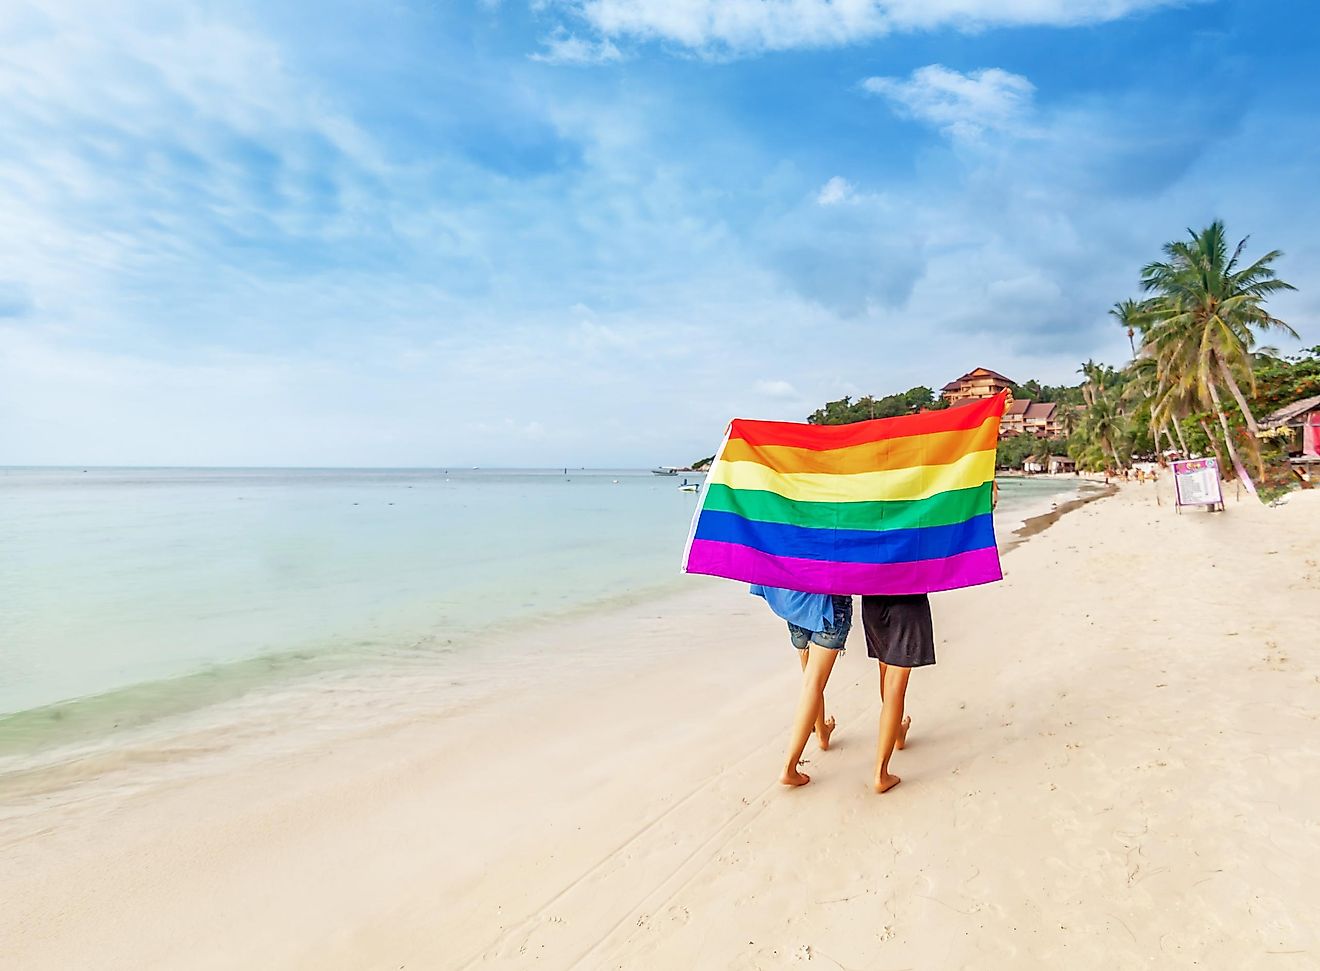 If you are a LGBTQ+ member, it is recommended you steer clear of Jamaica.